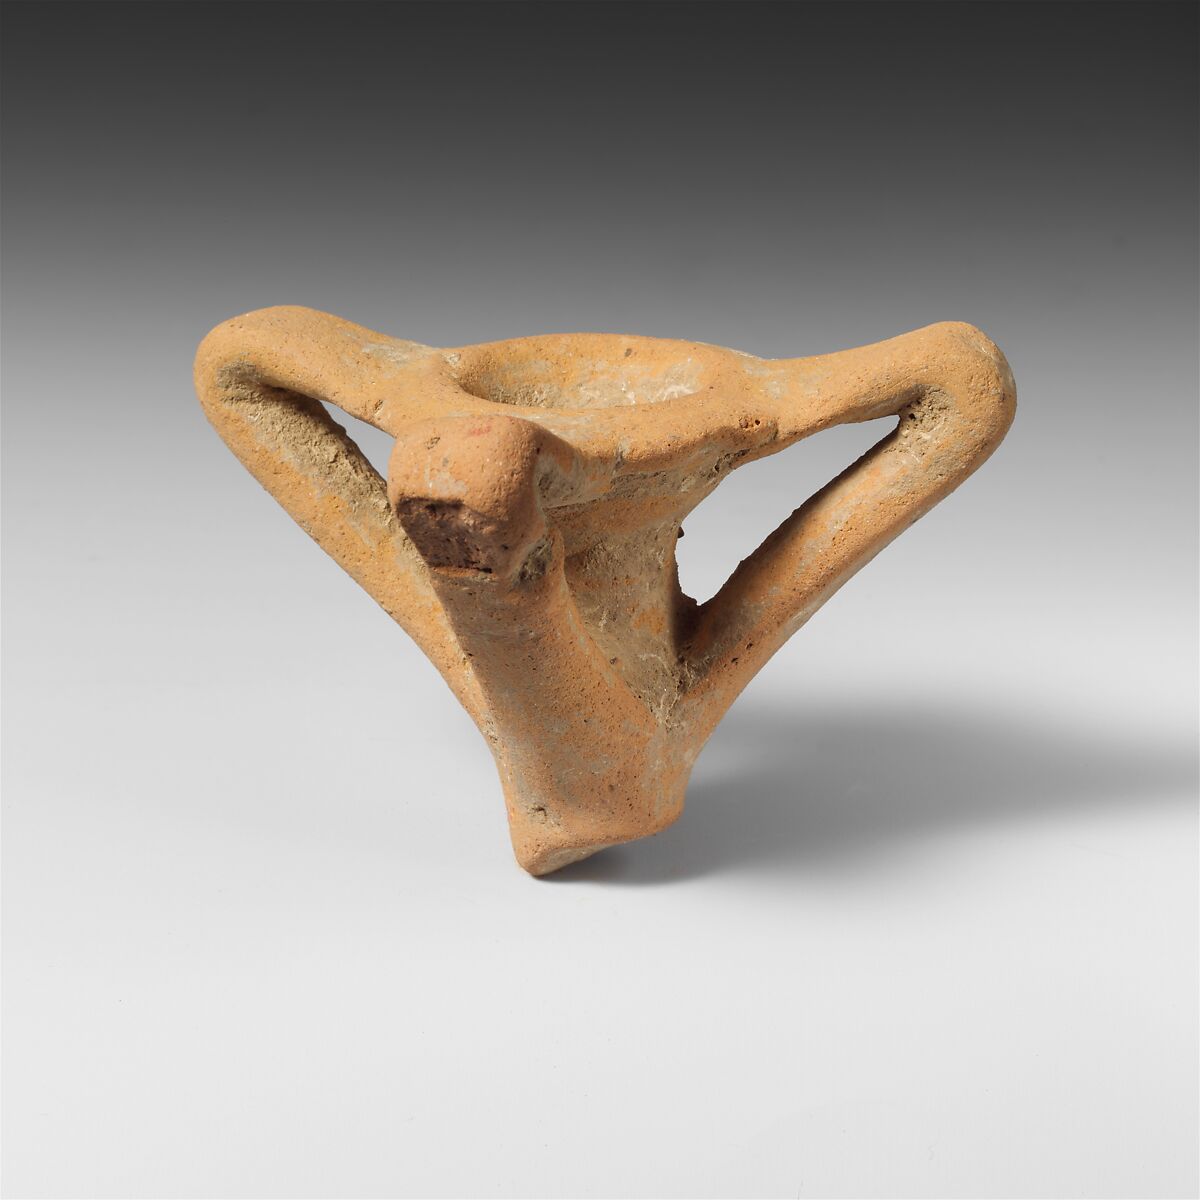 Terracotta finial with three flanges, Terracotta, Greek, Laconian 